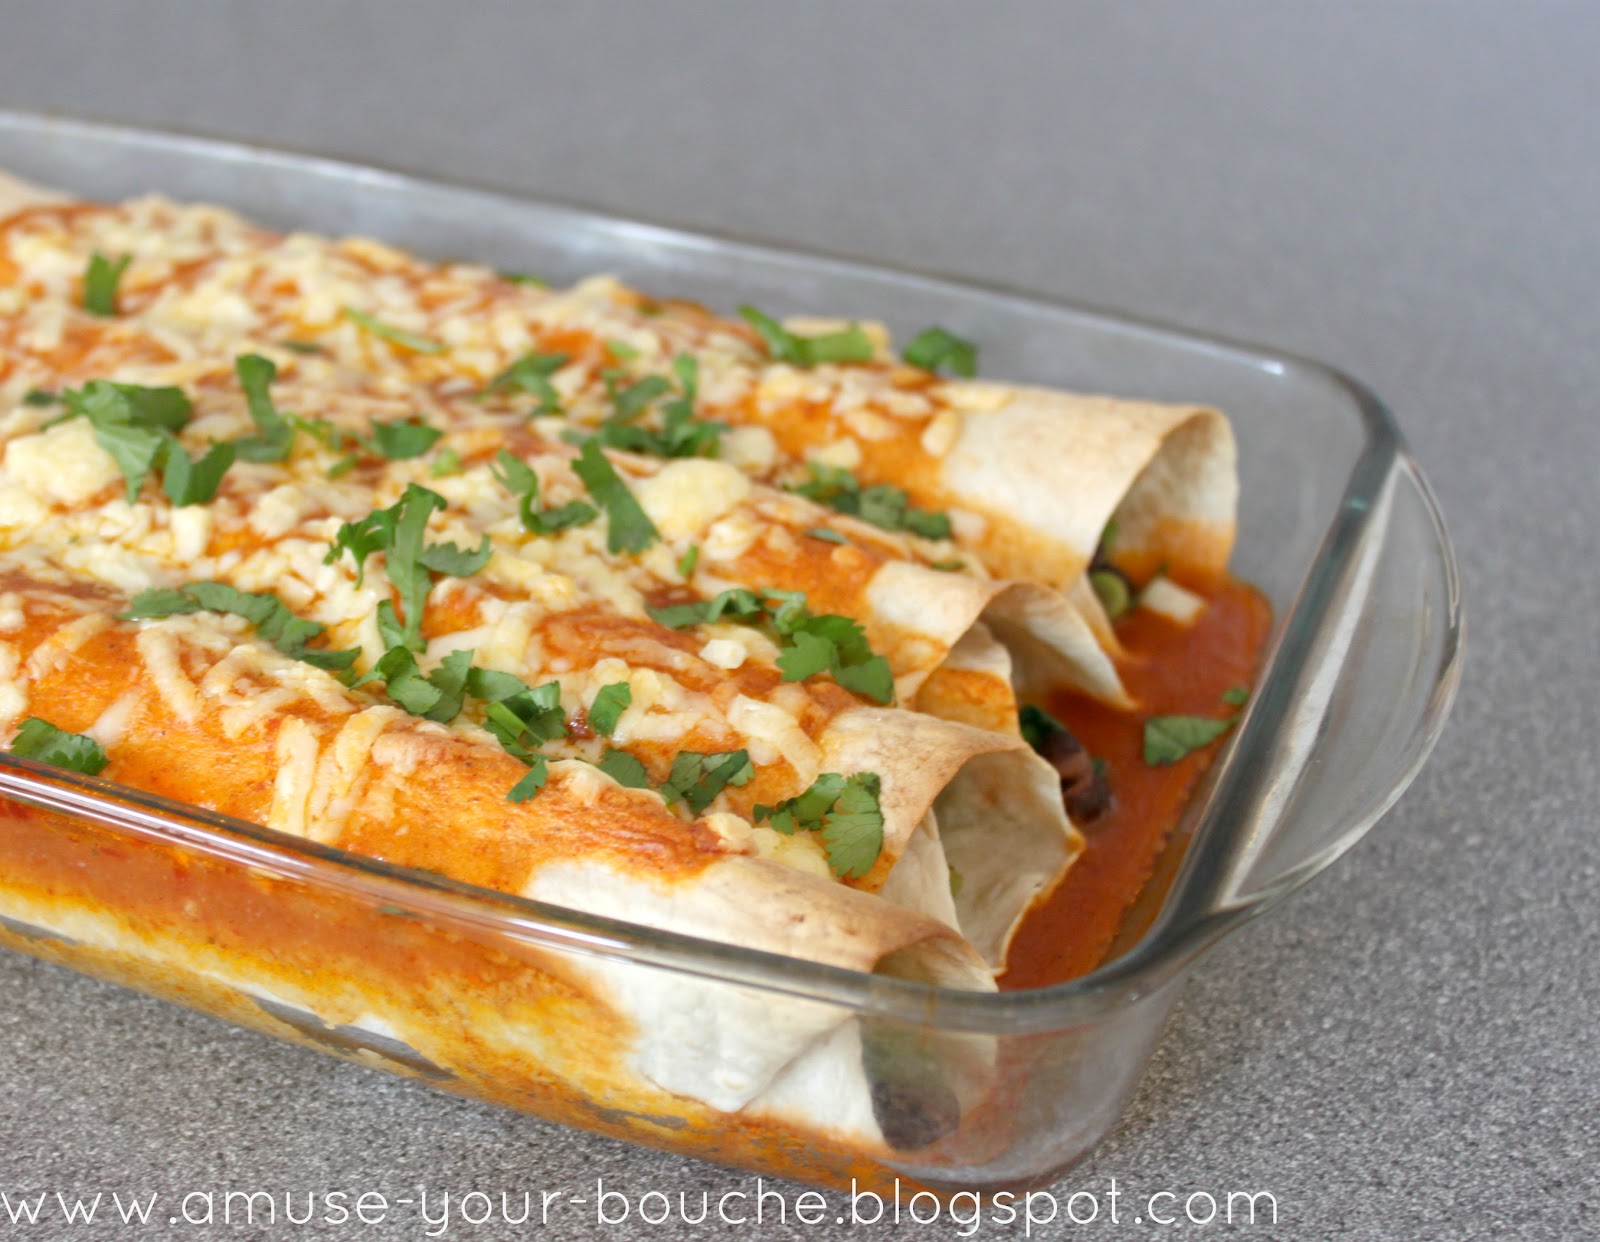 Spinach and black bean enchiladas with homemade sauce – Easy Cheesy